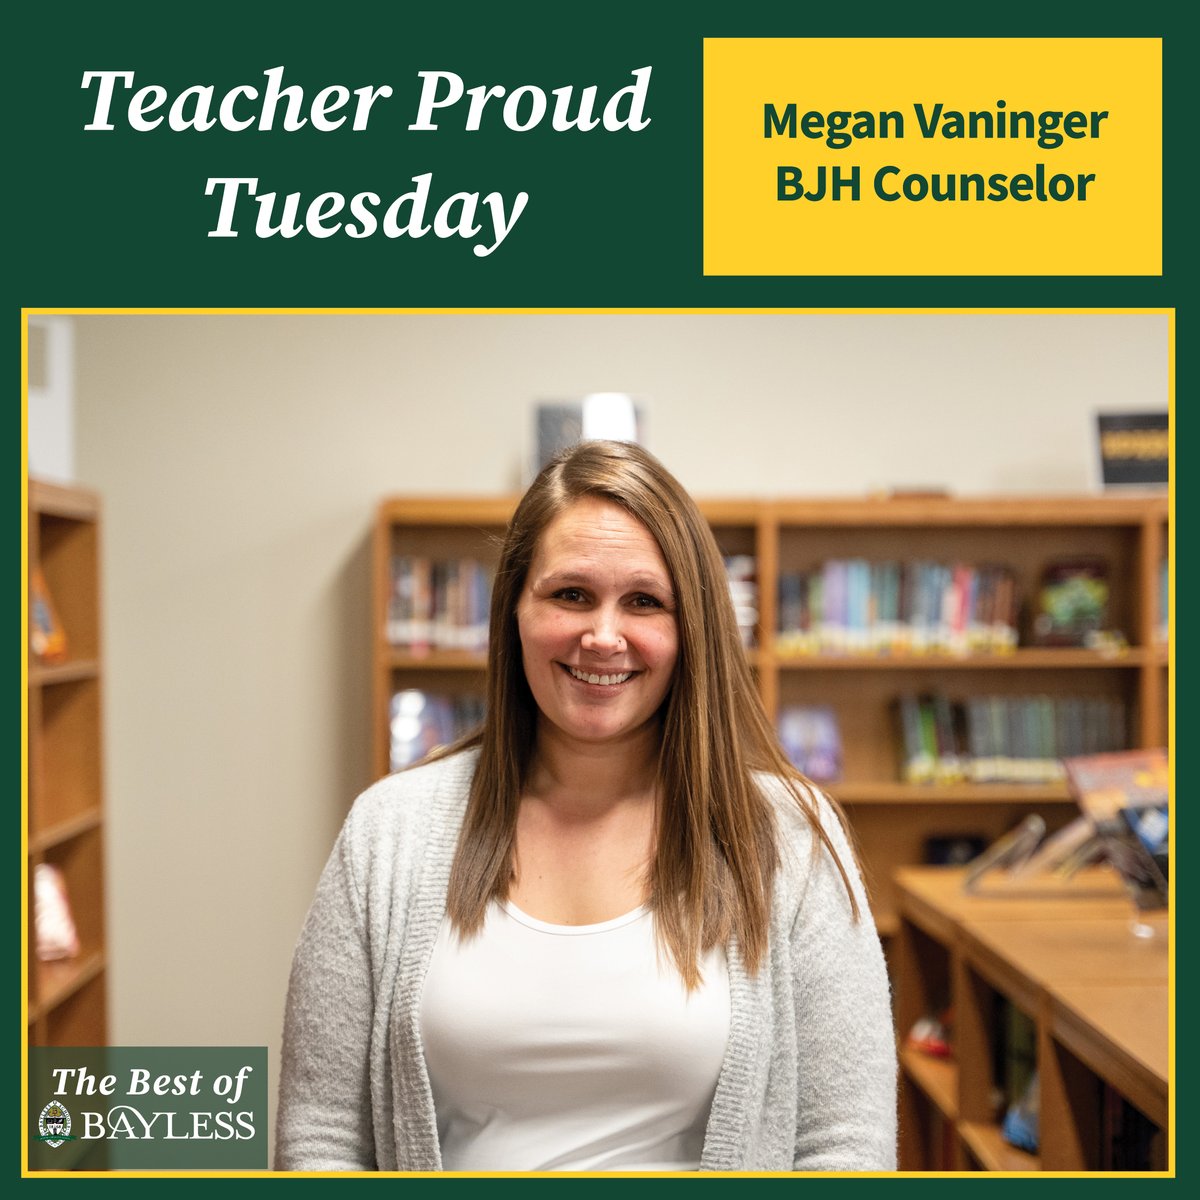 This (weather-adjusted) #TeacherProudTuesday is focused on counselor Megan Vaninger! 

Her relationship with students makes school great for many Bronchos. You can often see them greeting Ms. Vaninger with a smile, high five or a fist bump.

#BringTheStampede